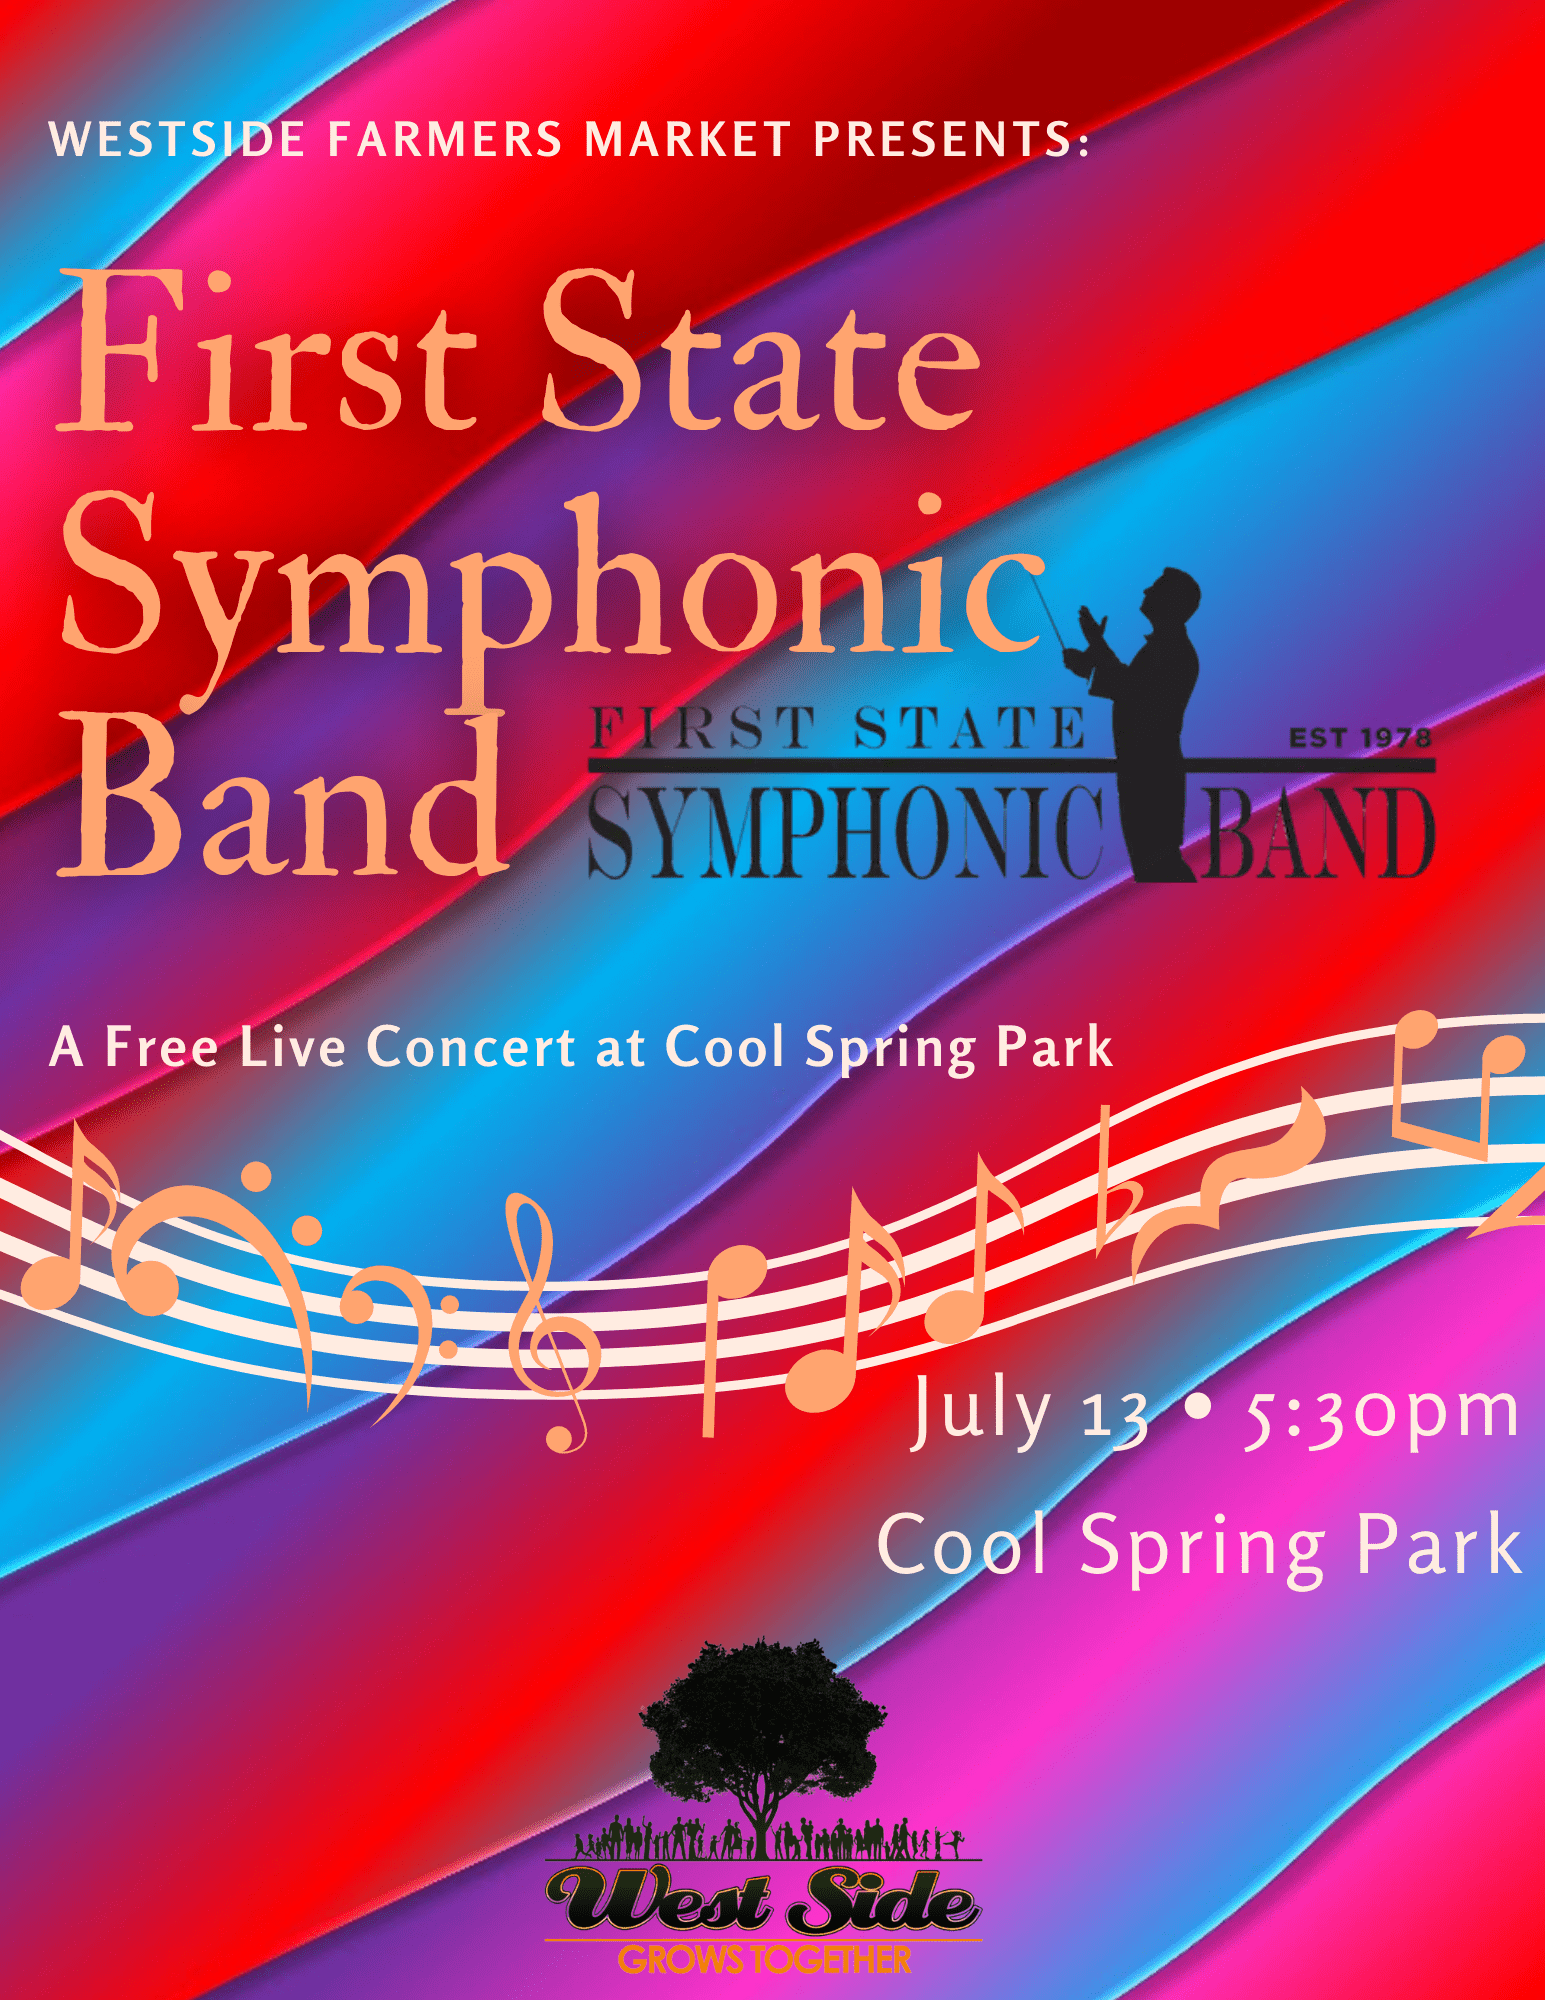 First State Symphonic Band Concert at Farmers Market Flyer 1